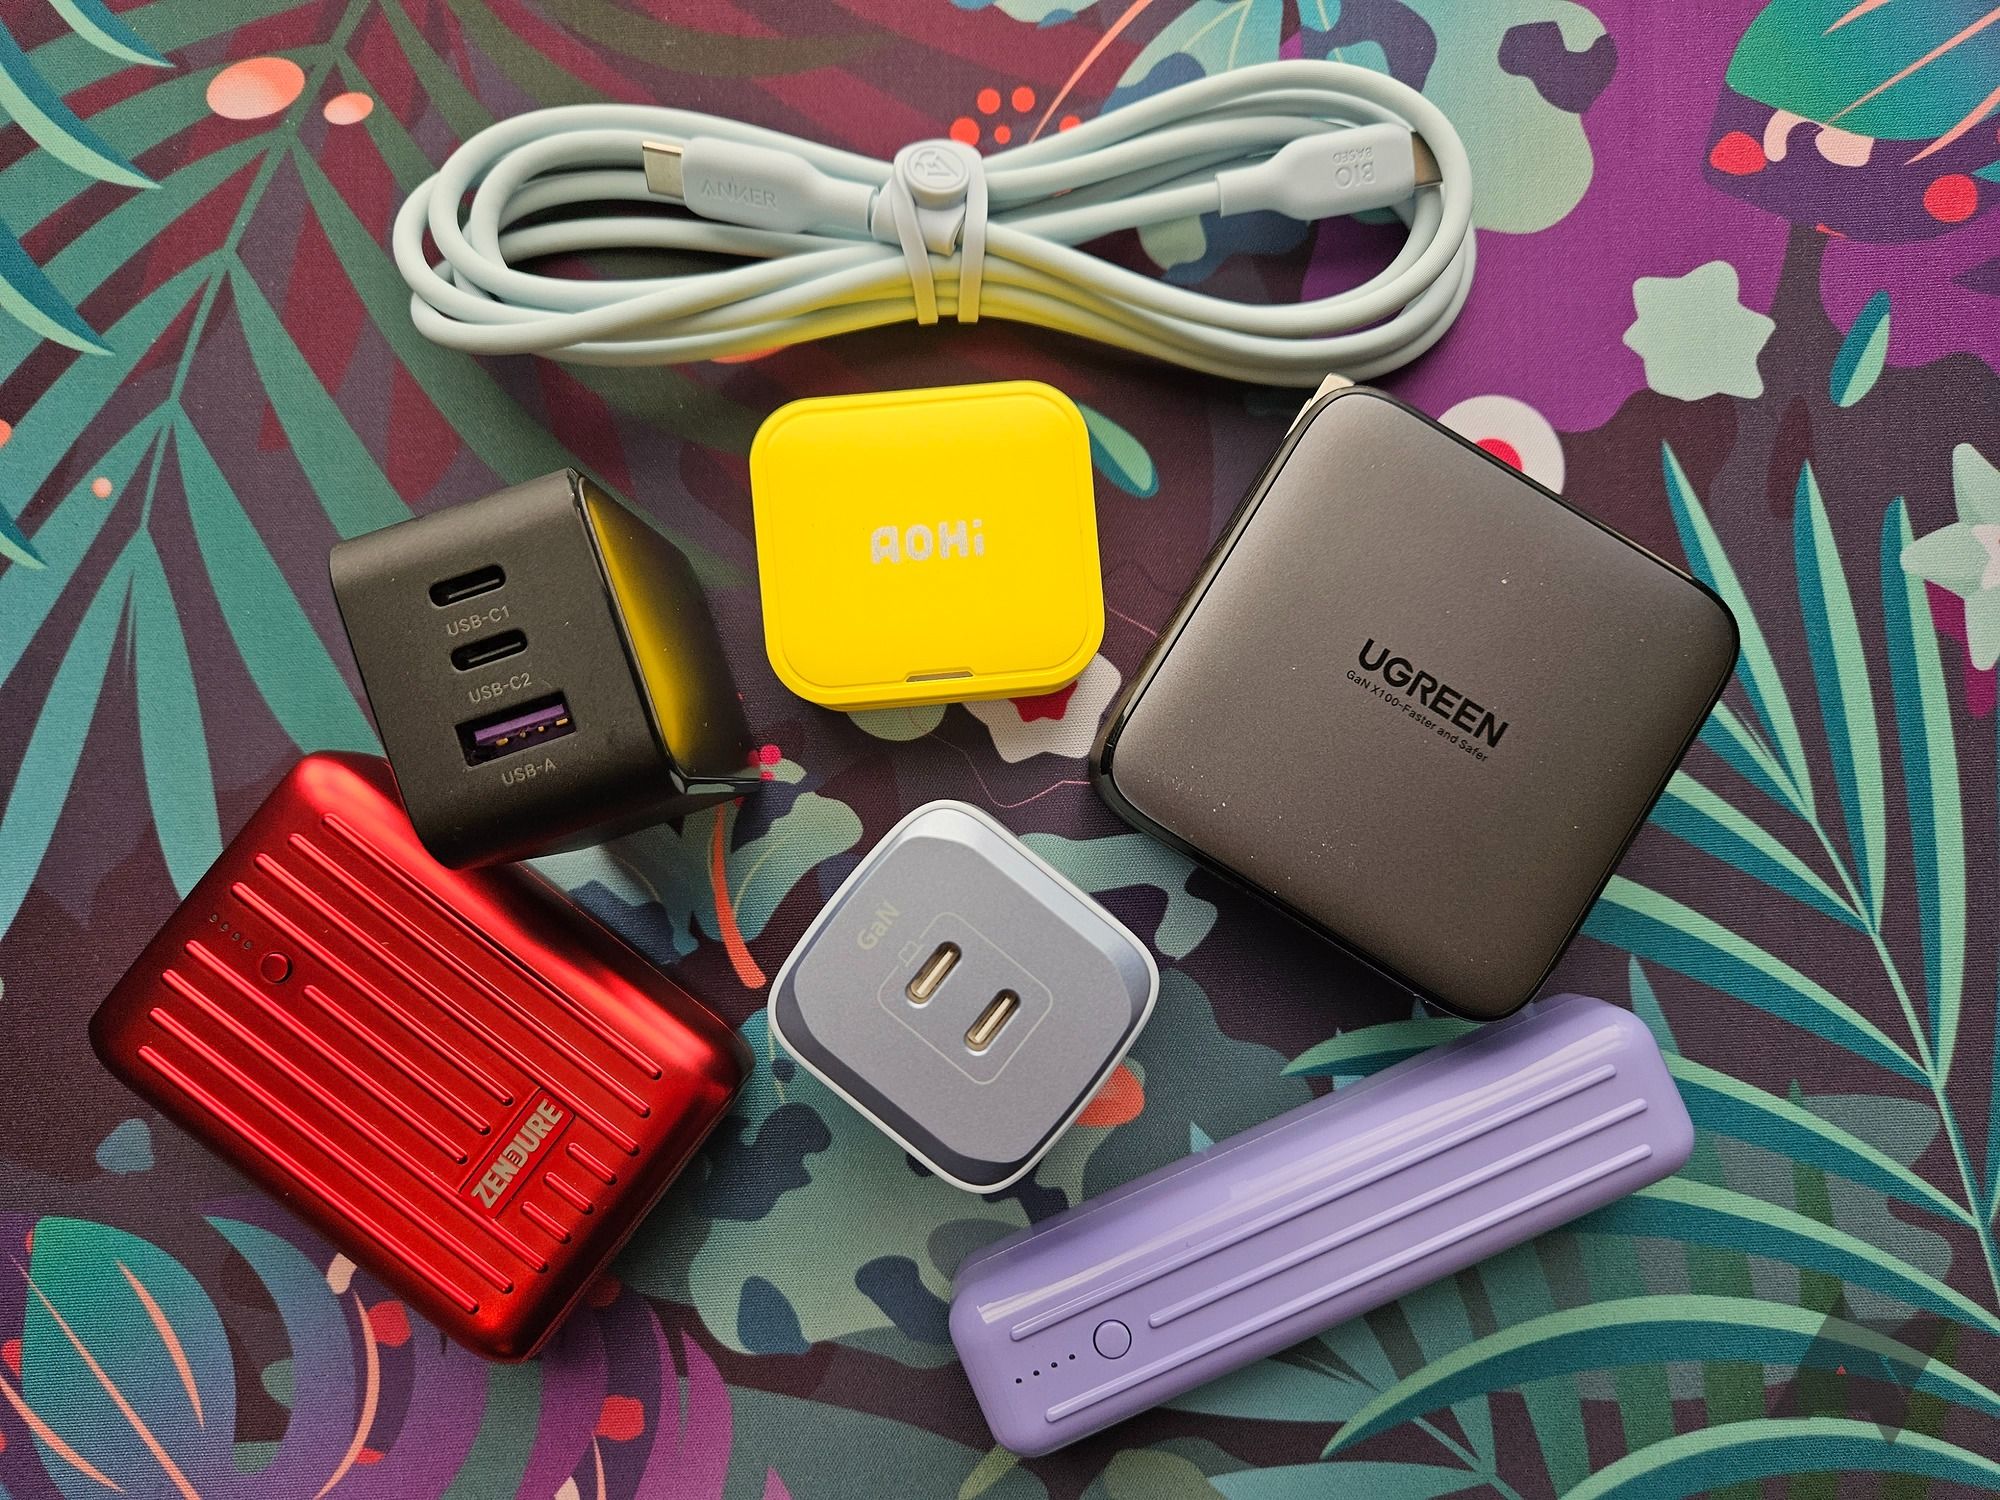 A small assortment of USB-C chargers, power banks, and cables